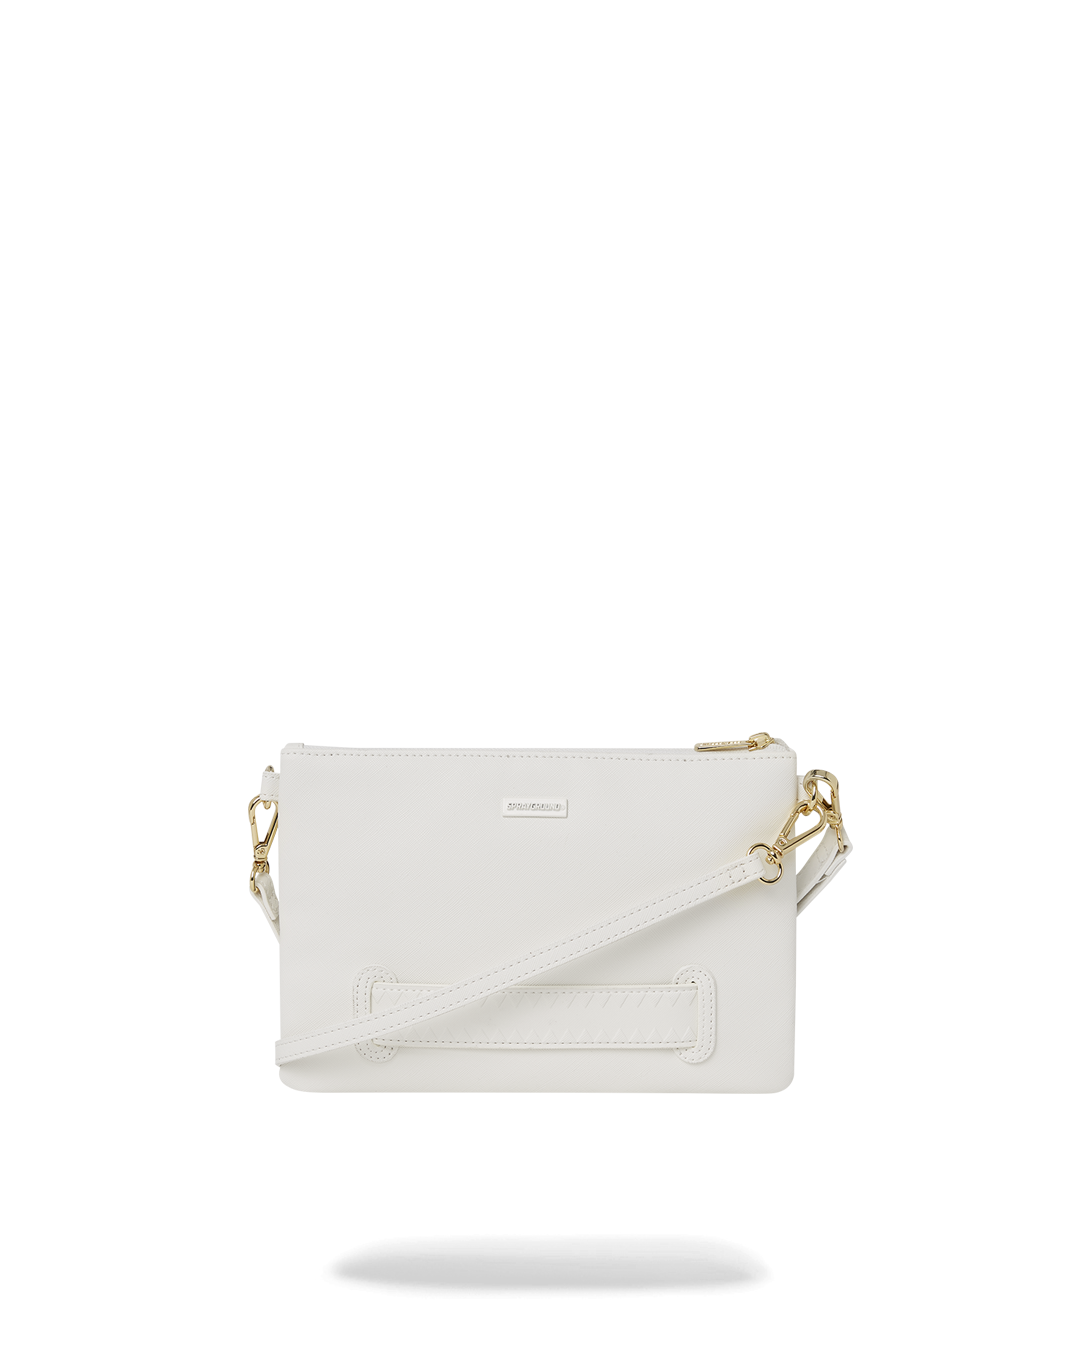 SECRET LIFE OF PEARLS CROSSOVER CLUTCH